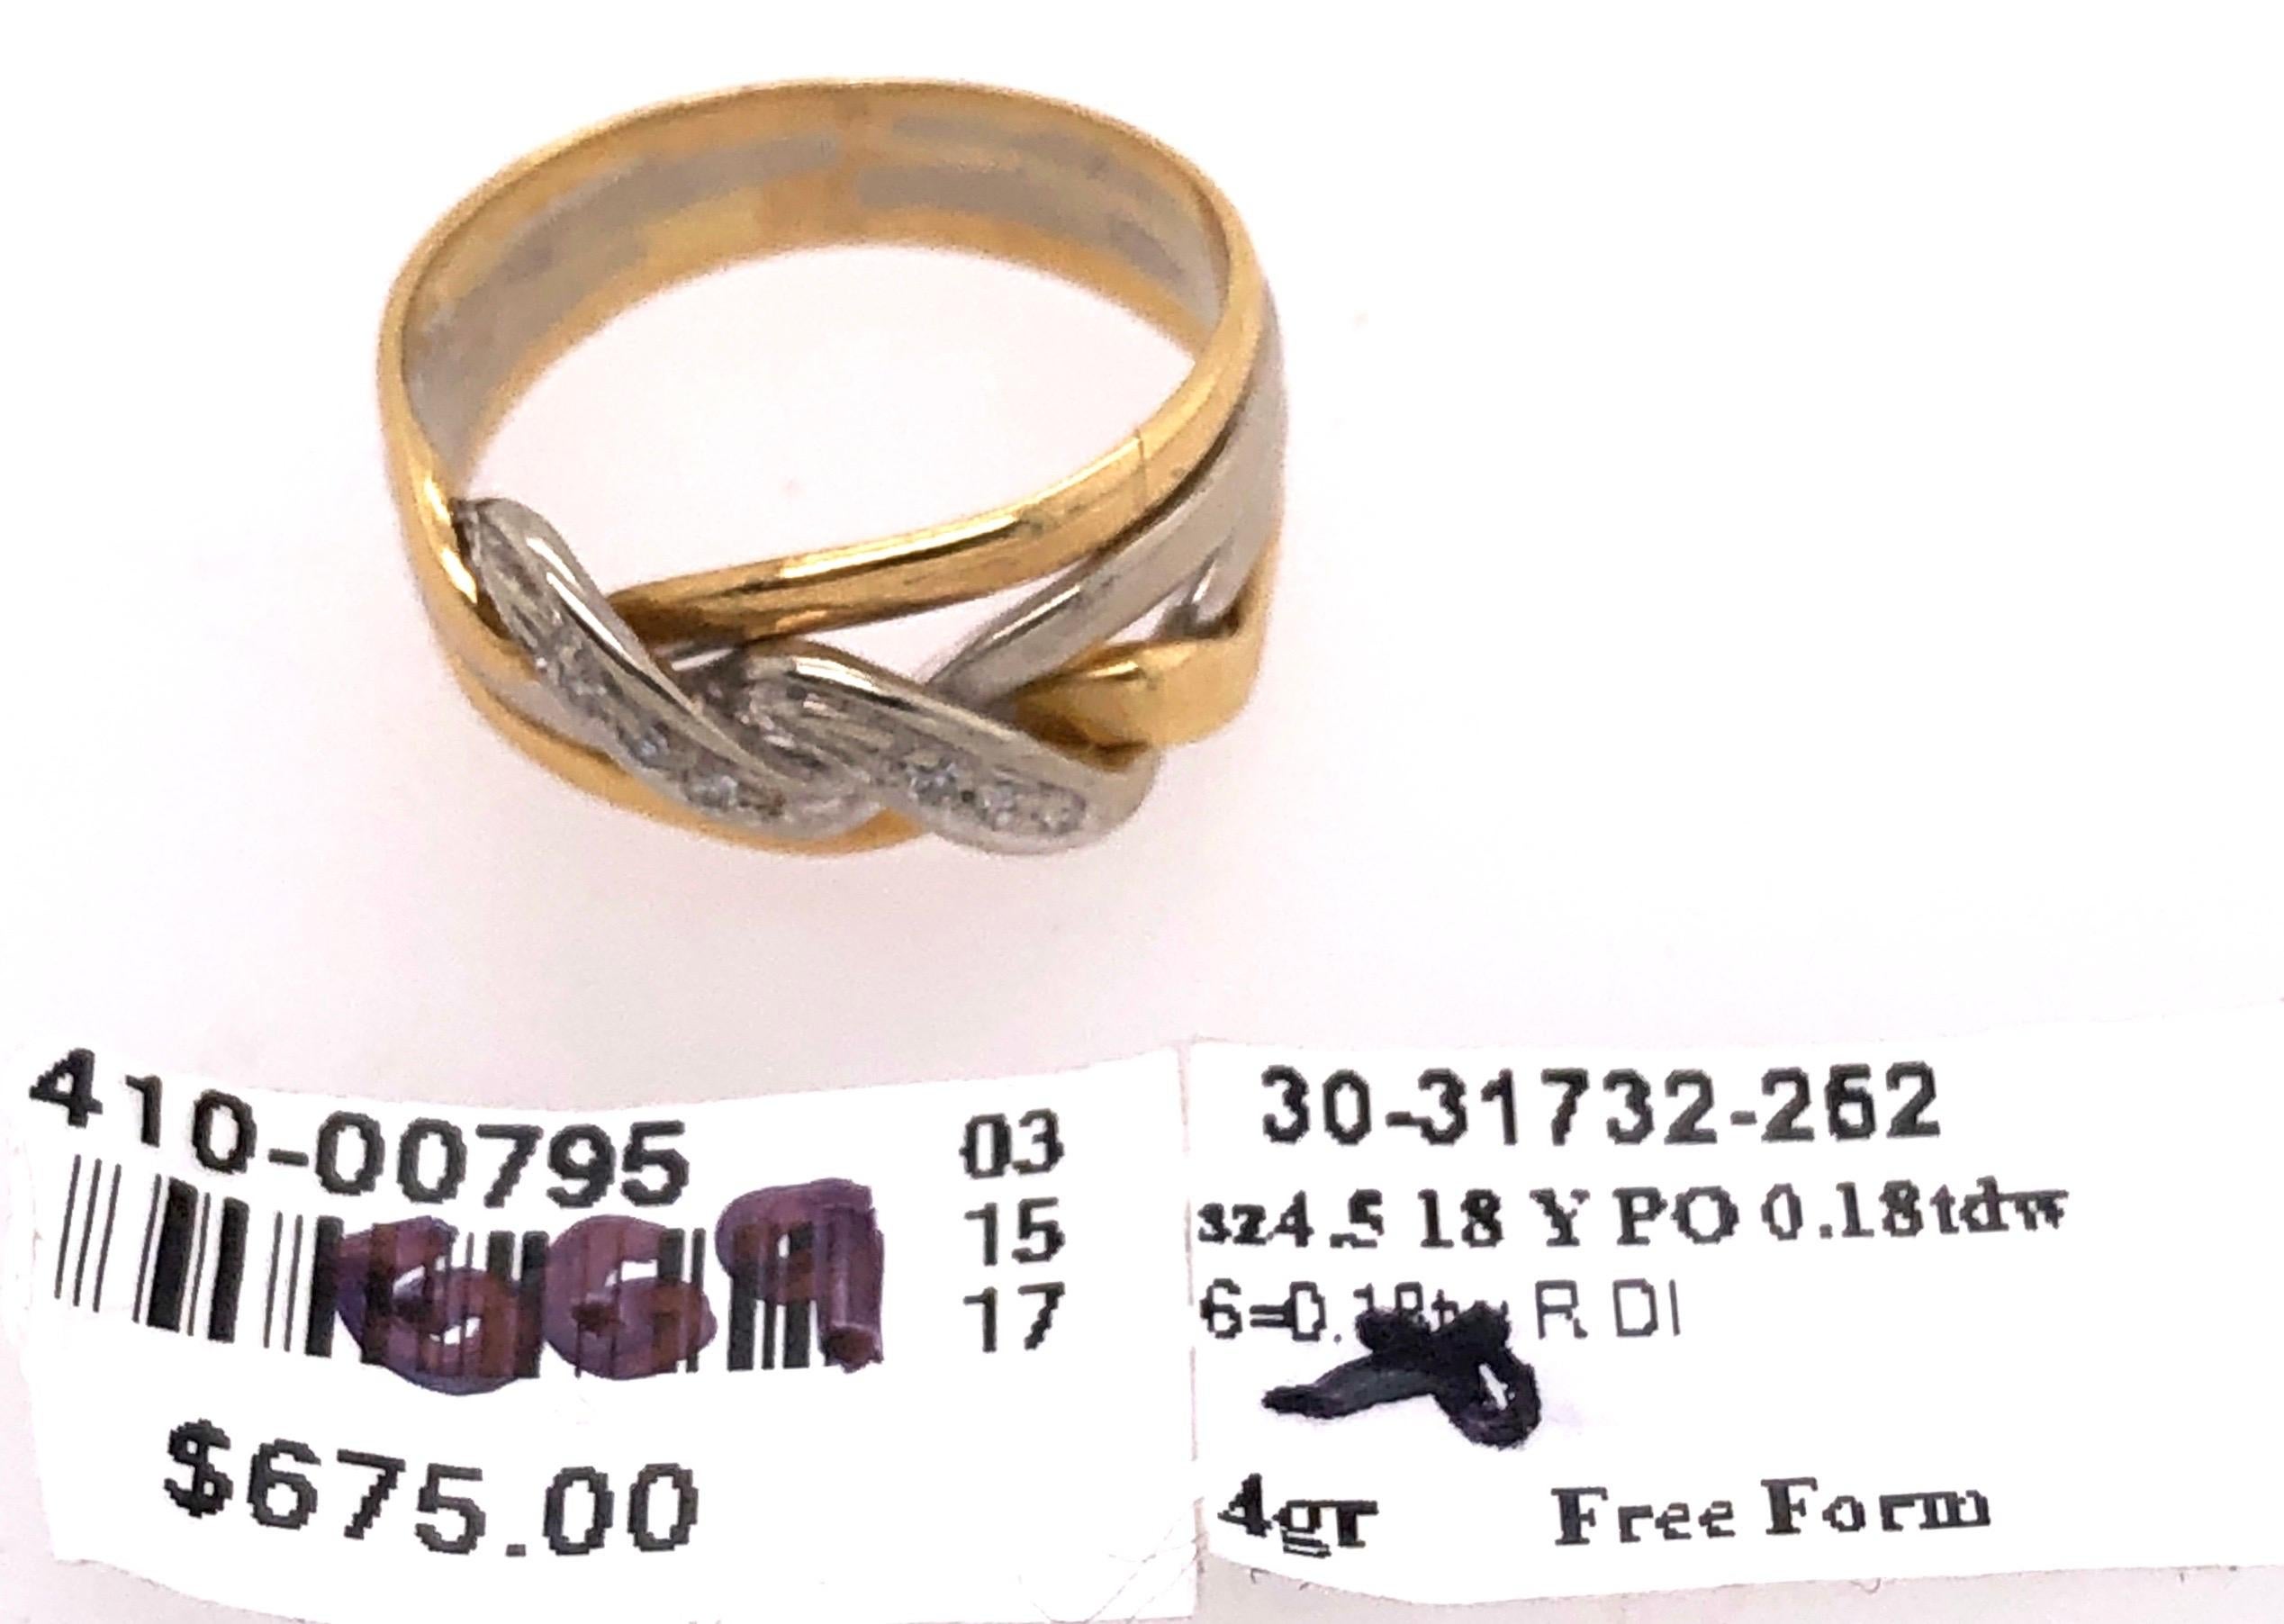 18 Karat Two-Tone Gold and Diamond Twist Wedding Fashion Ring 0.18 TDW In Good Condition For Sale In Stamford, CT